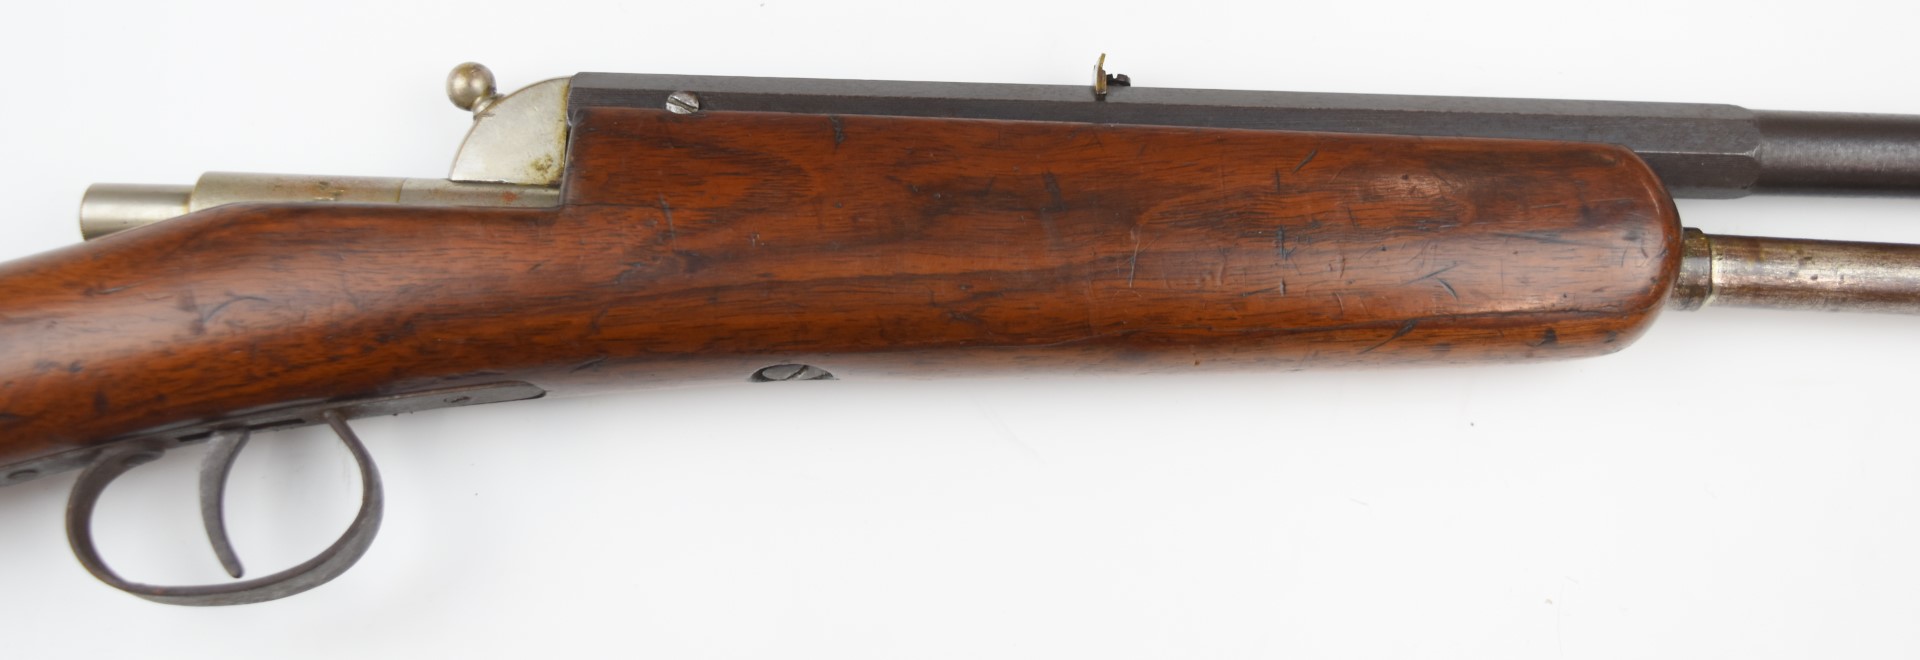 Lee-Nord Excellent C1 .22 pump-action air rifle with raised cheek-piece to the stock, adjustable - Image 4 of 17